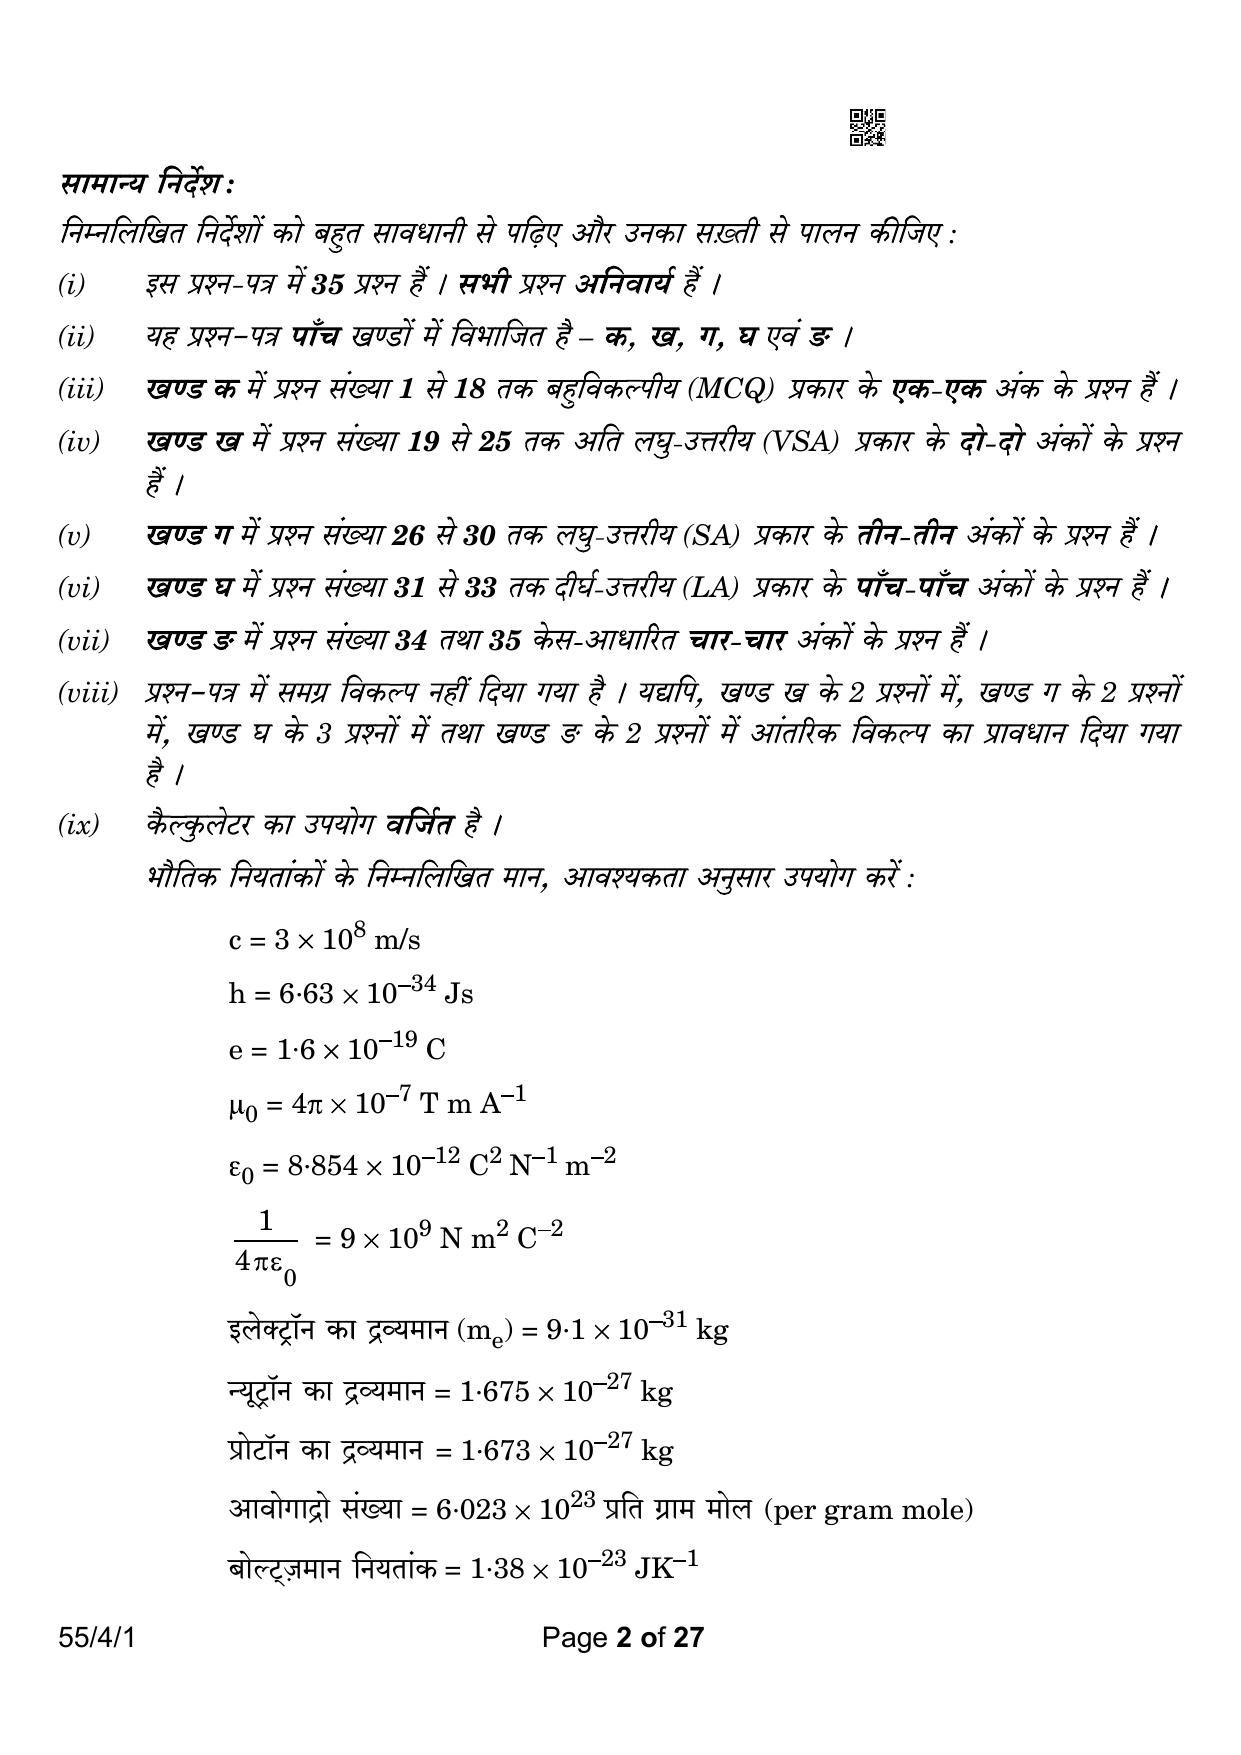 CBSE Class 12 55-4-1 Physics 2023 Question Paper - Page 2